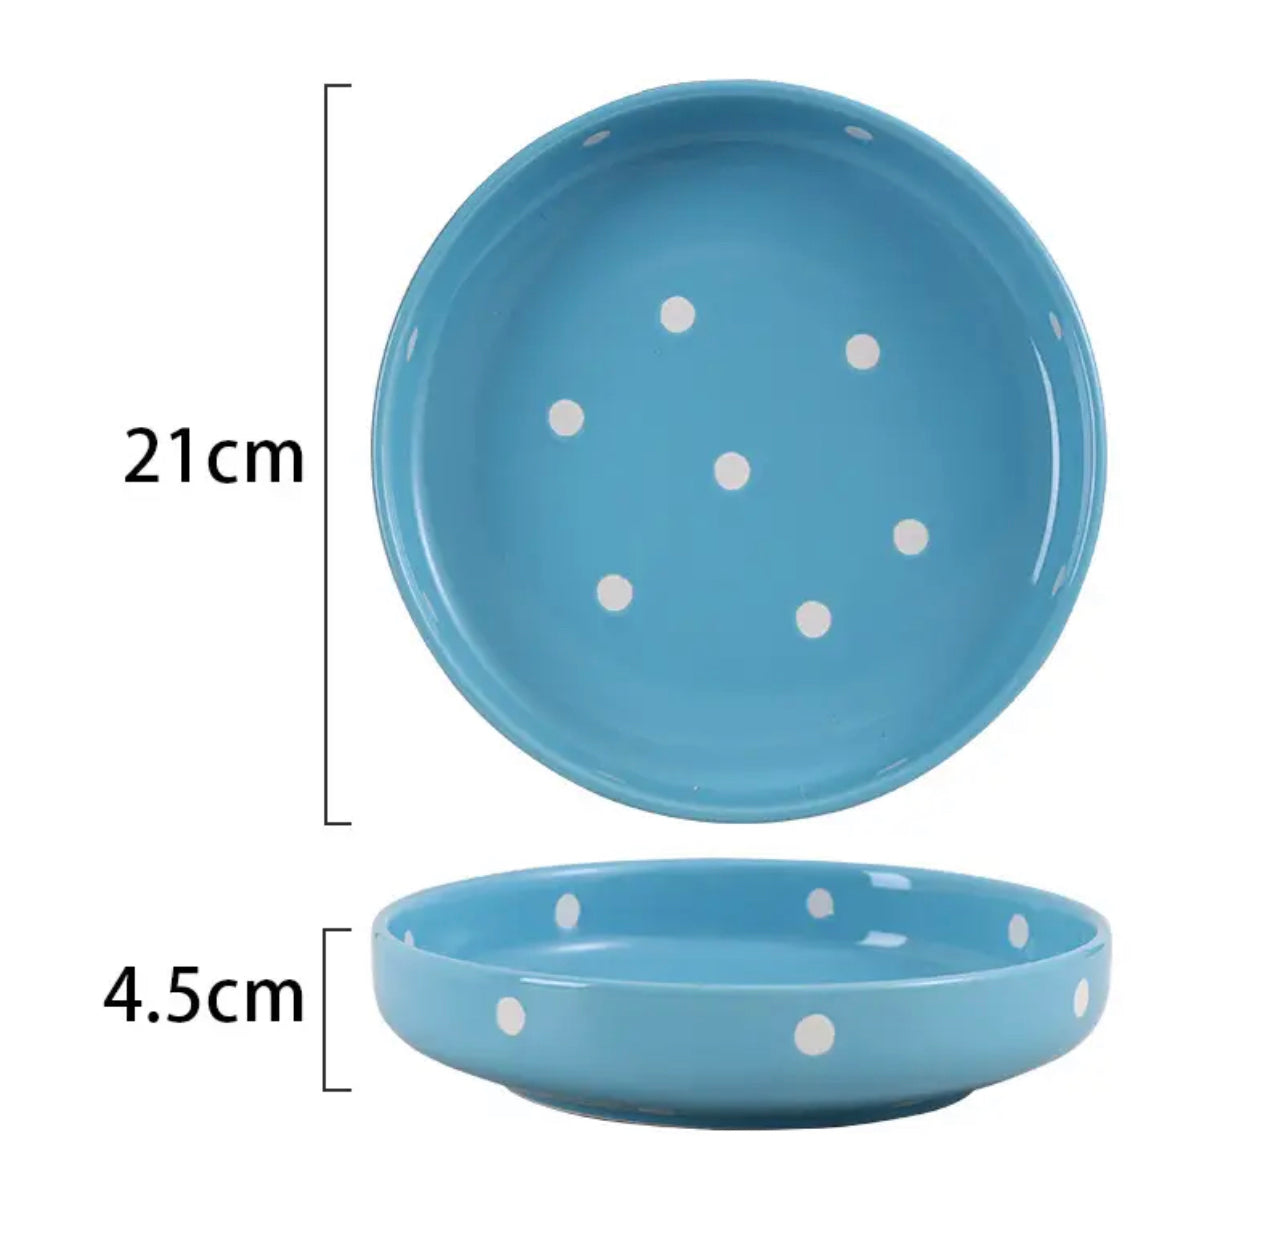 The Polka Dots Dishes